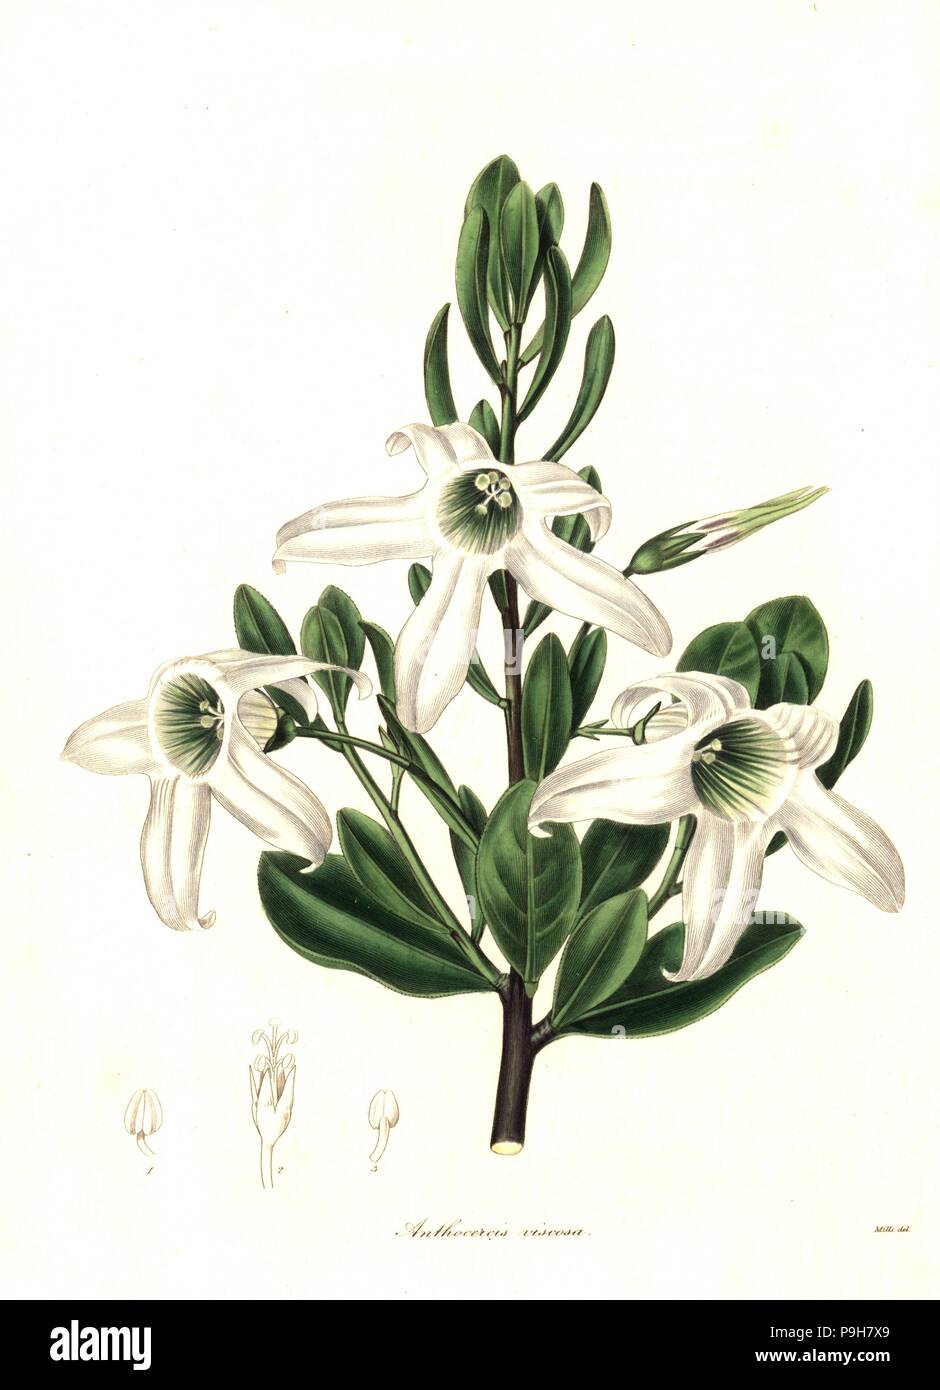 Sticky tailflower or glutinous anthocercis, Anthocercis viscosa. Handcoloured copperplate engraving after a botanical illustration by Mills from Benjamin Maund and the Rev. John Stevens Henslow's The Botanist, London, 1836. Stock Photo